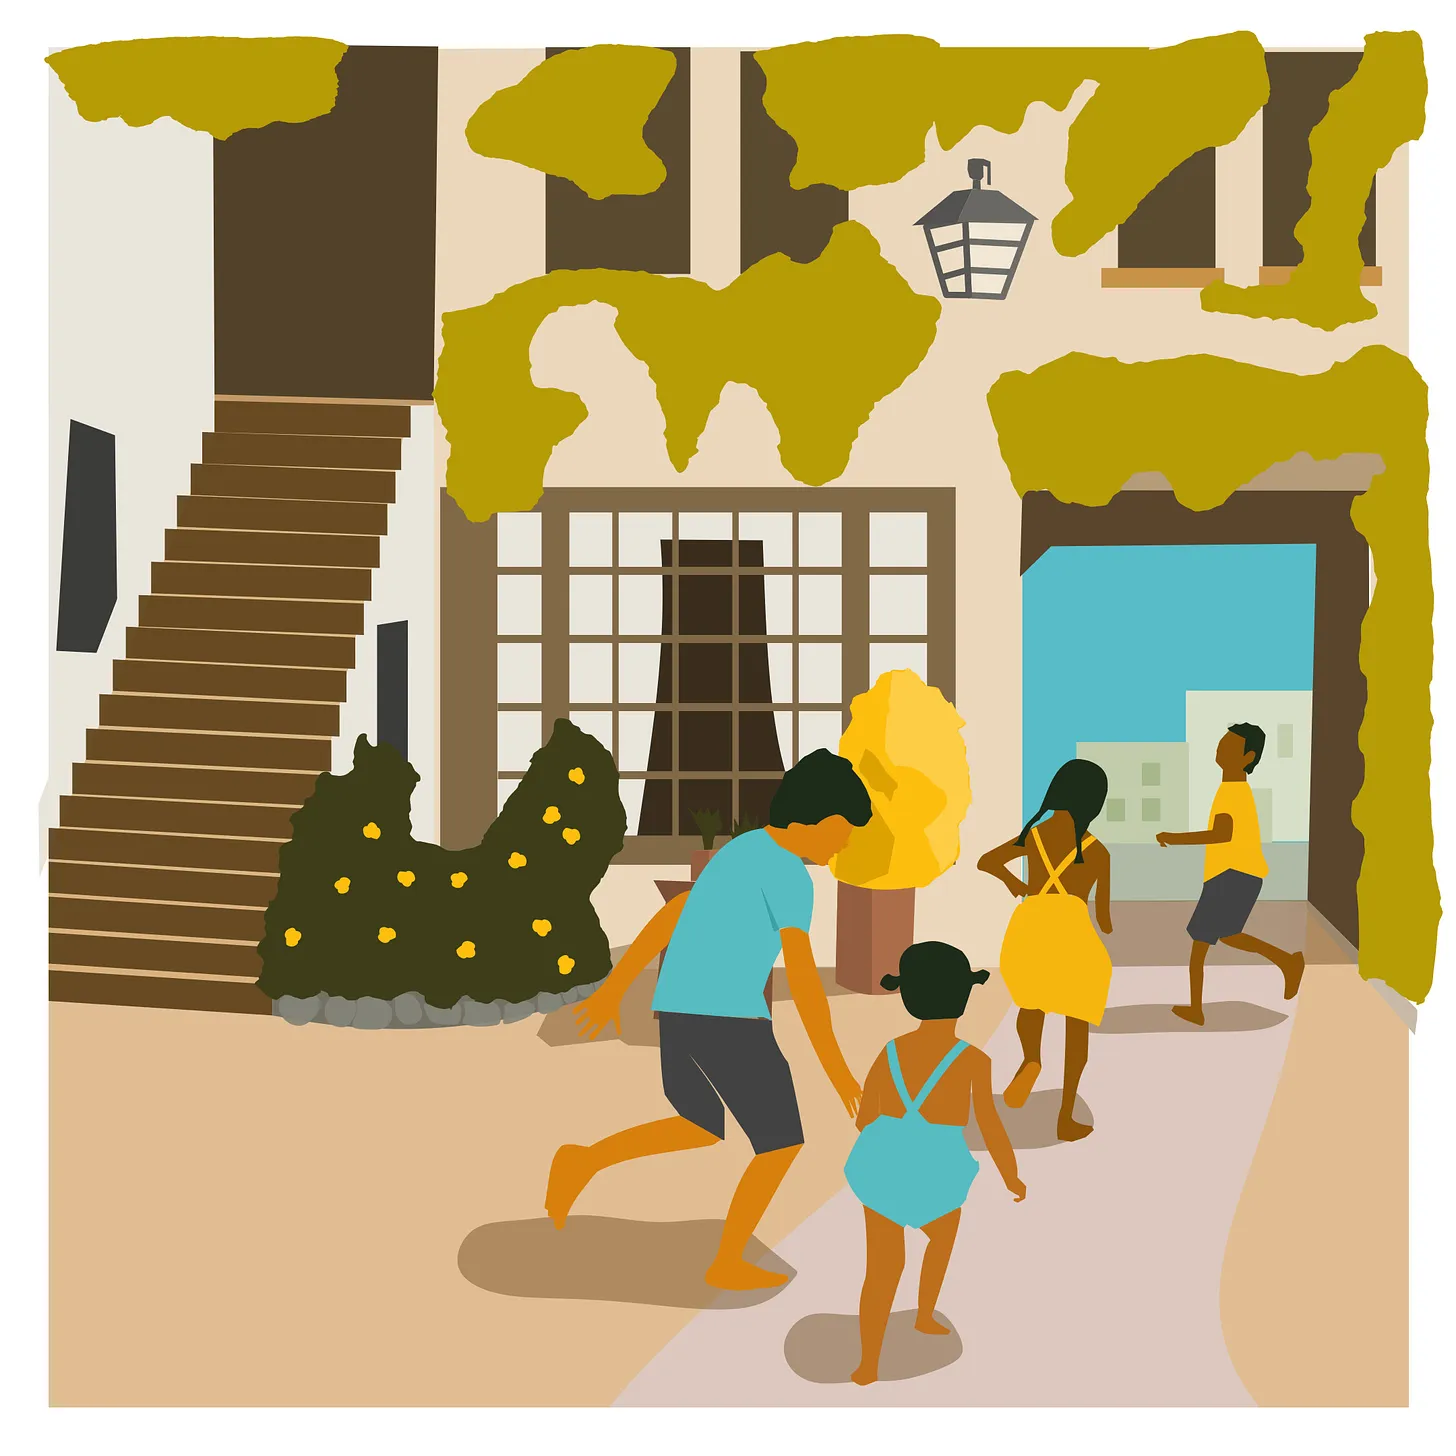 Illustration of kids playing in a courtyard.